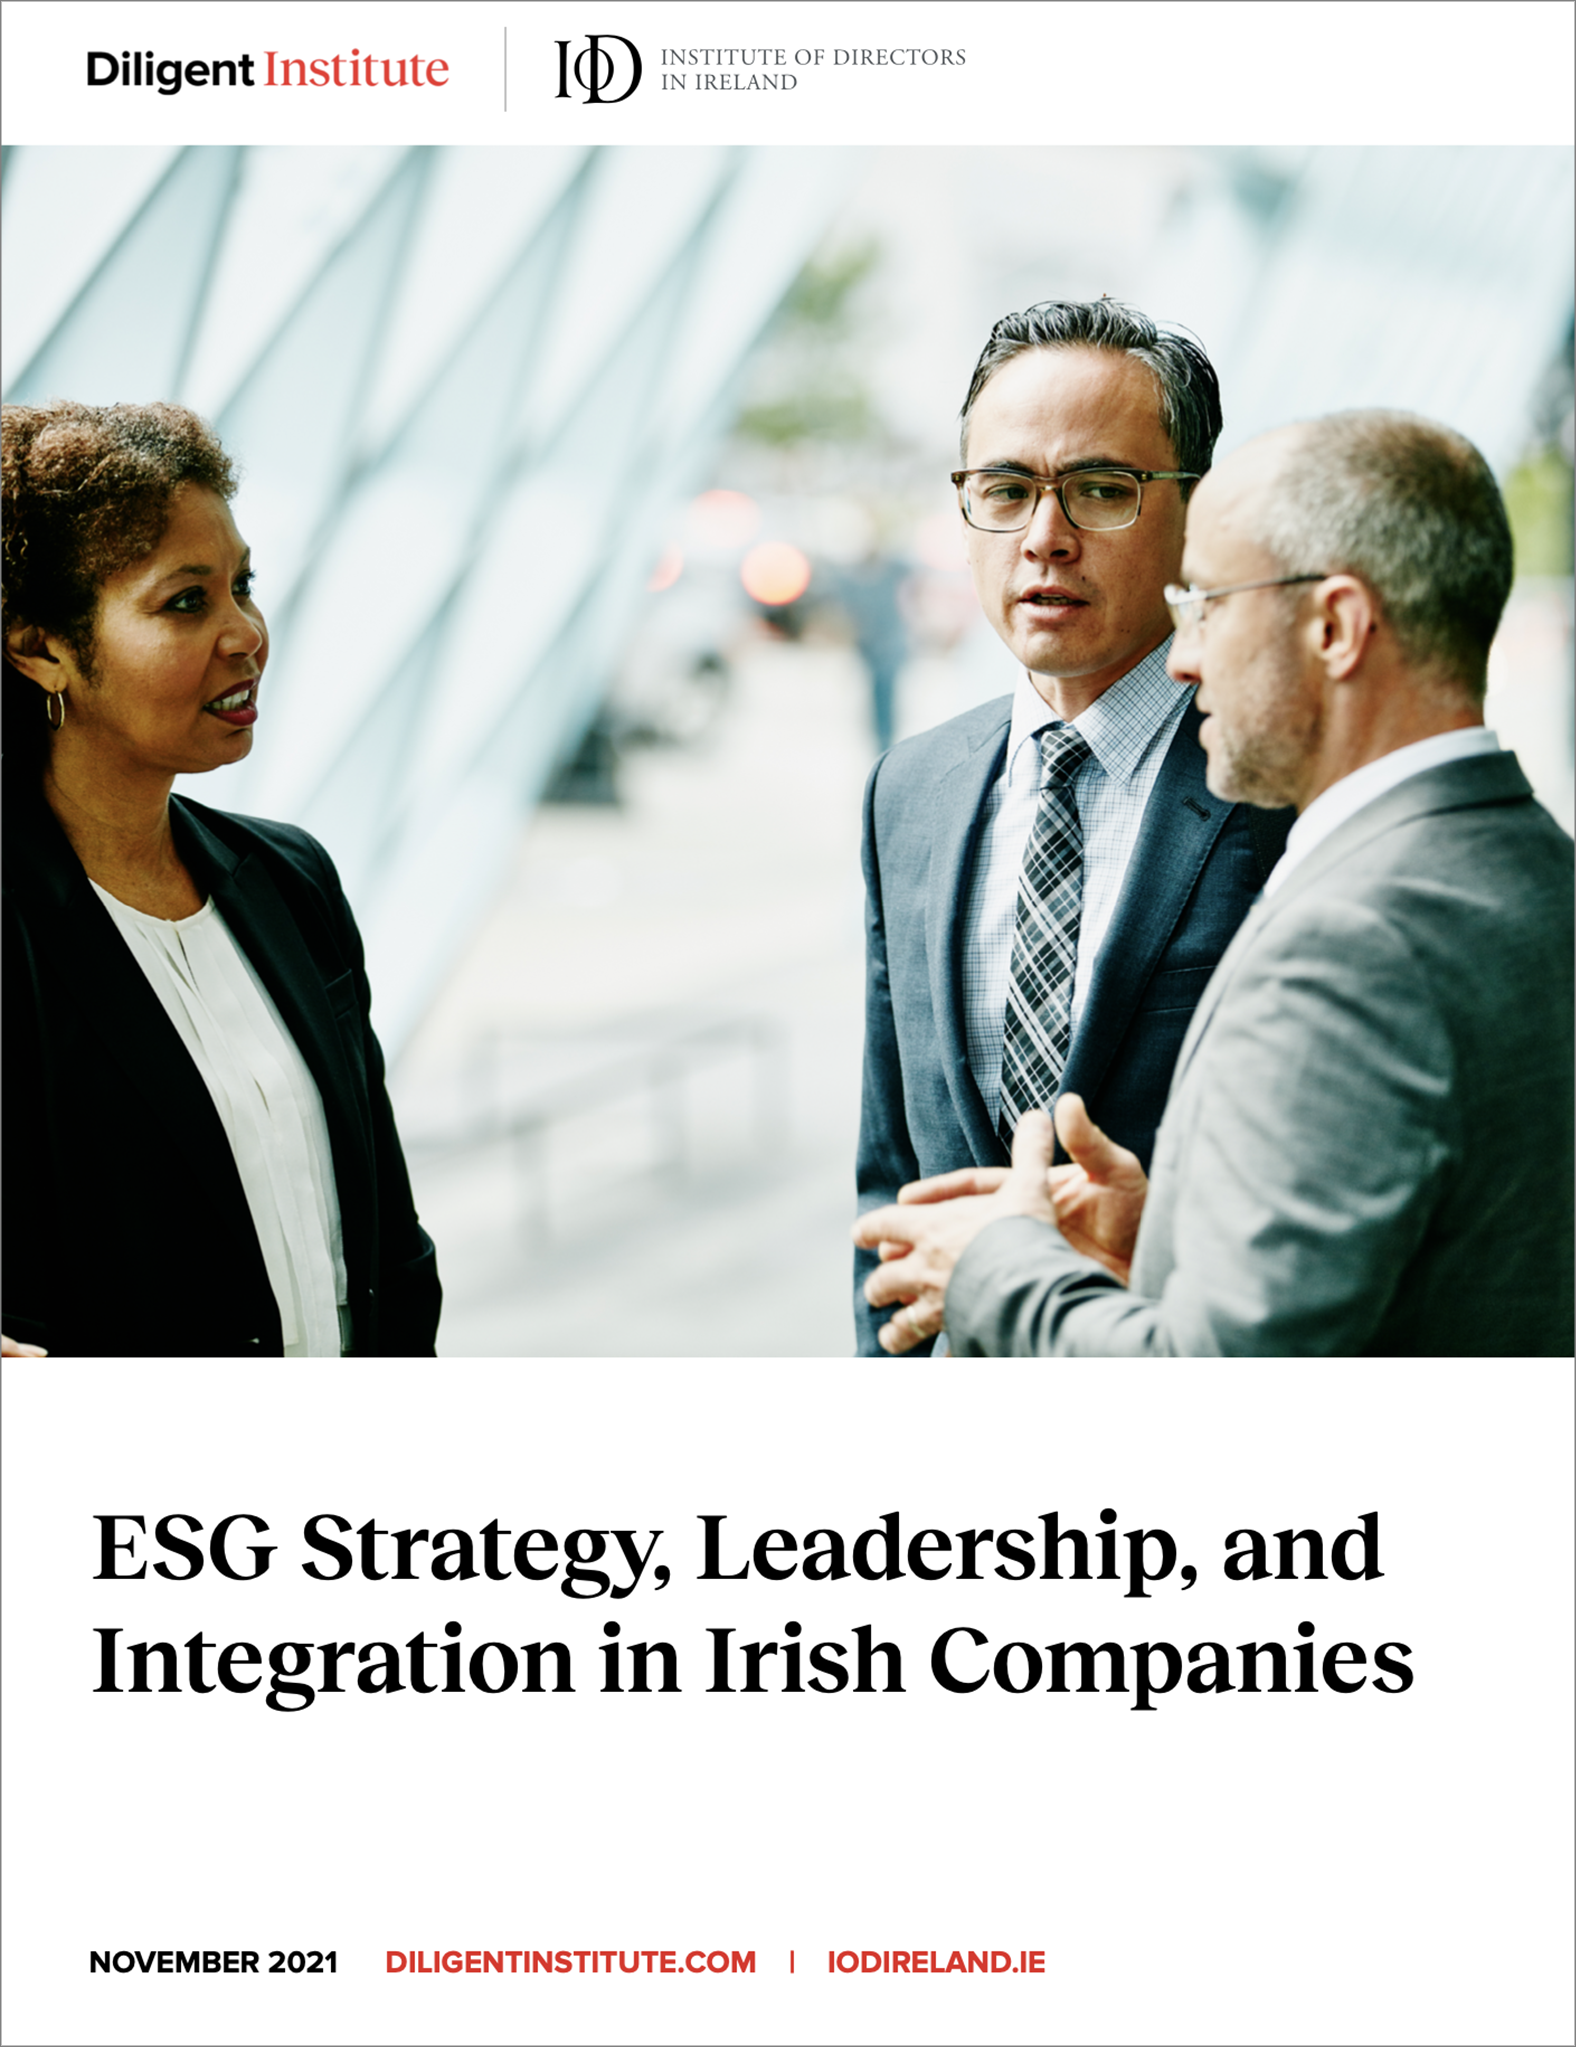 ESG Strategy, Leadership, and Integration in Irish Companies report